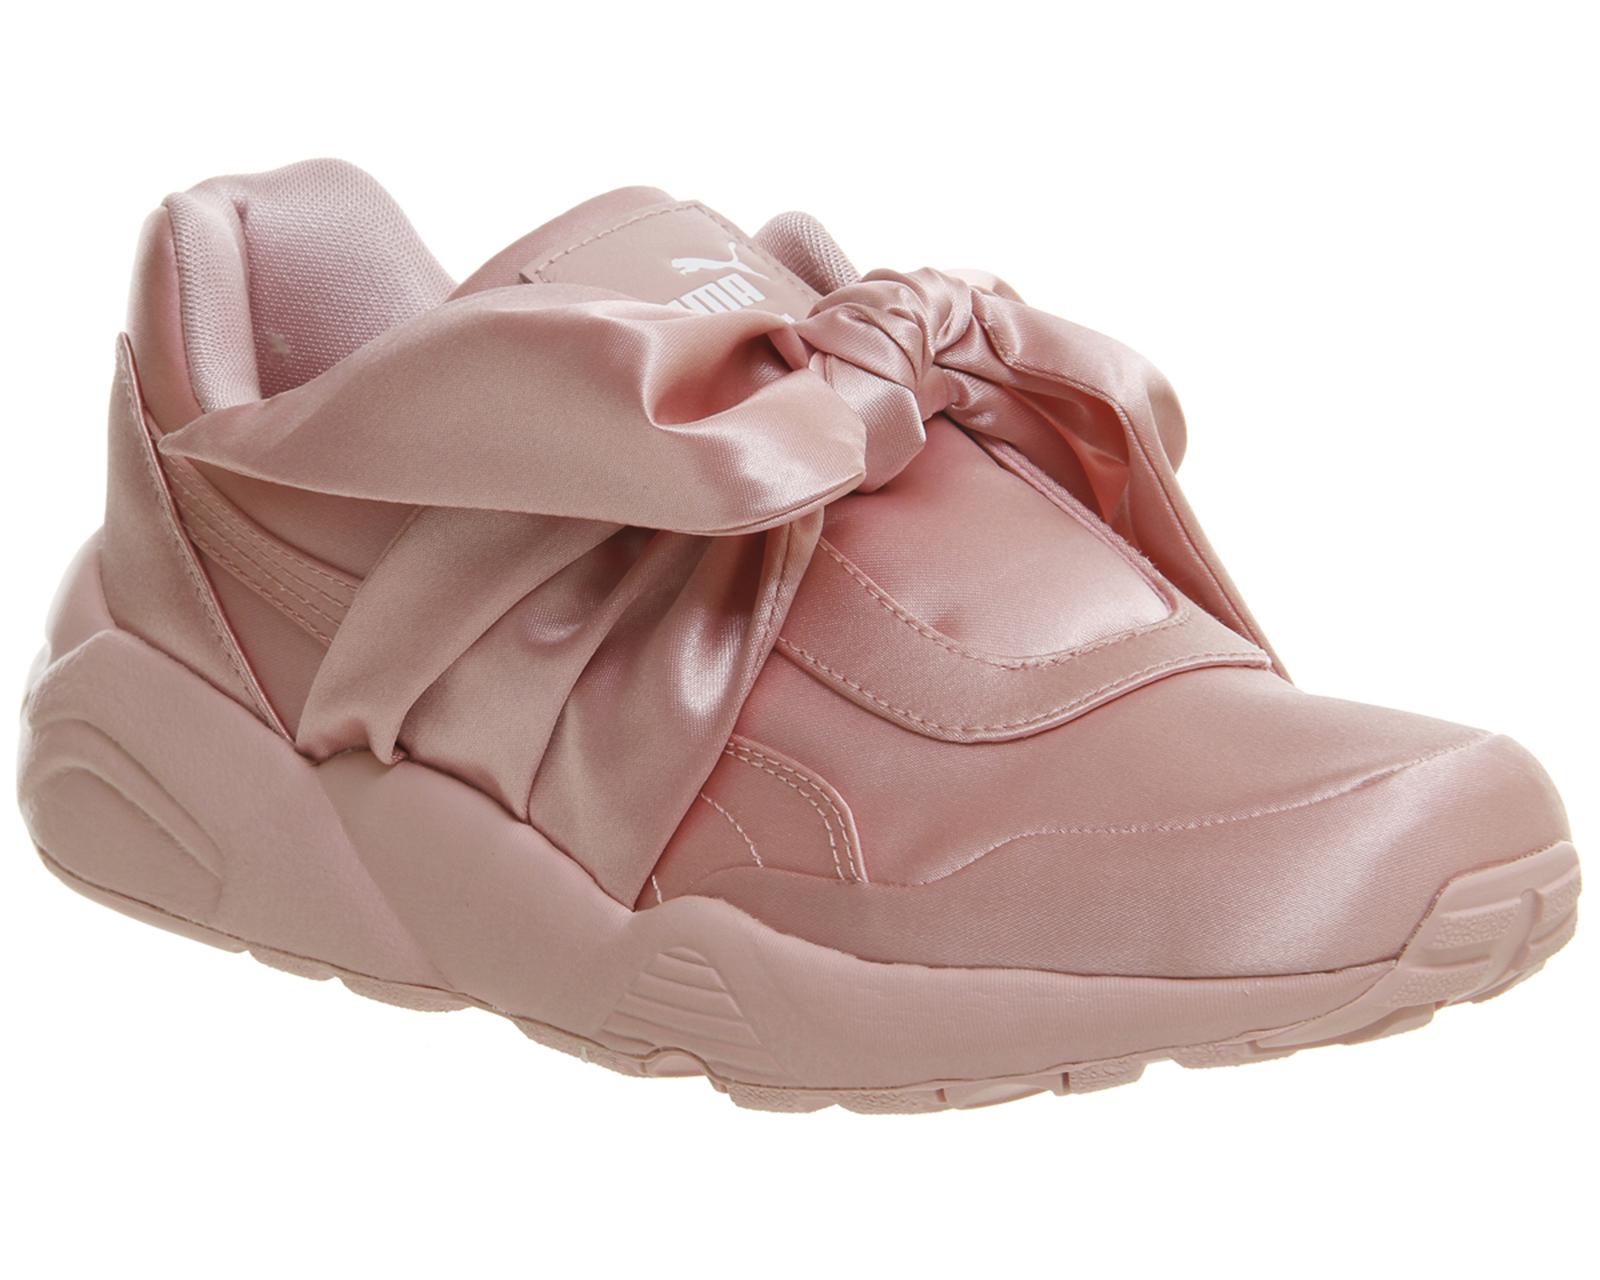 PUMA Satin R698 Trainers in Pink - Lyst